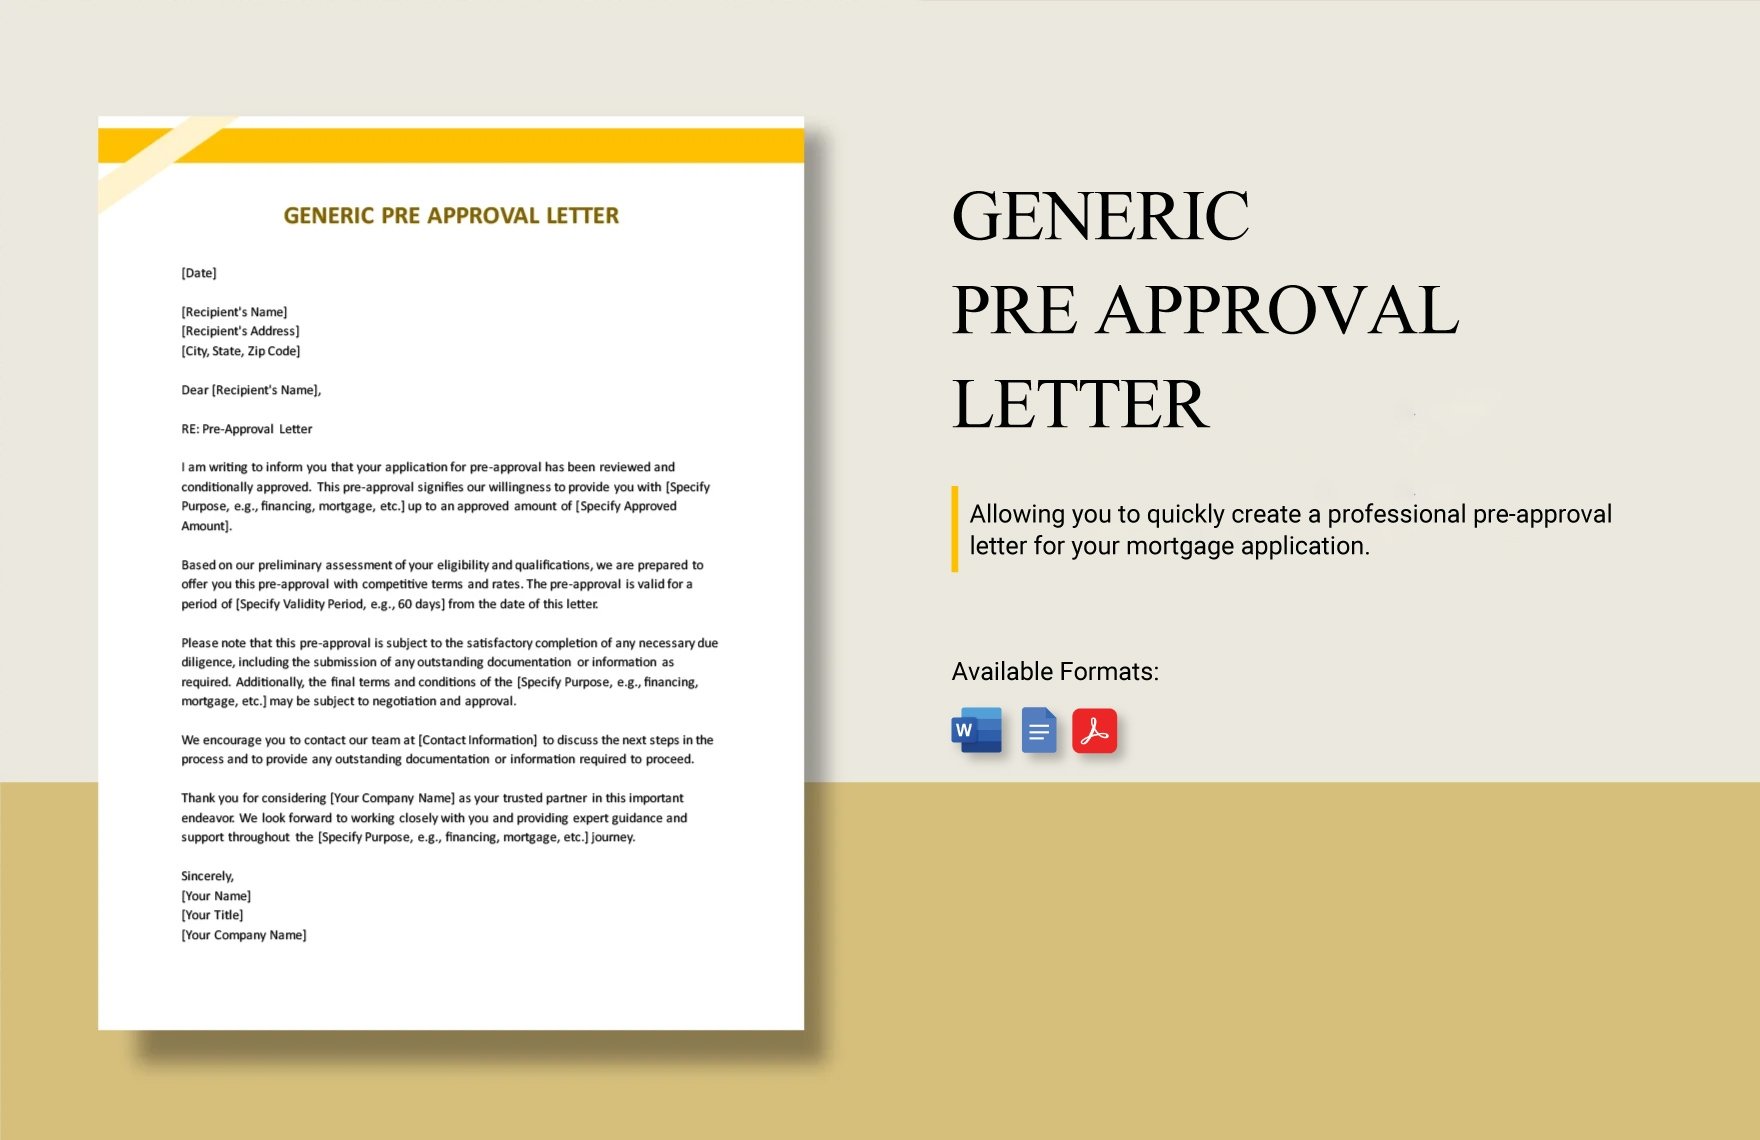 Generic Pre Approval Letter